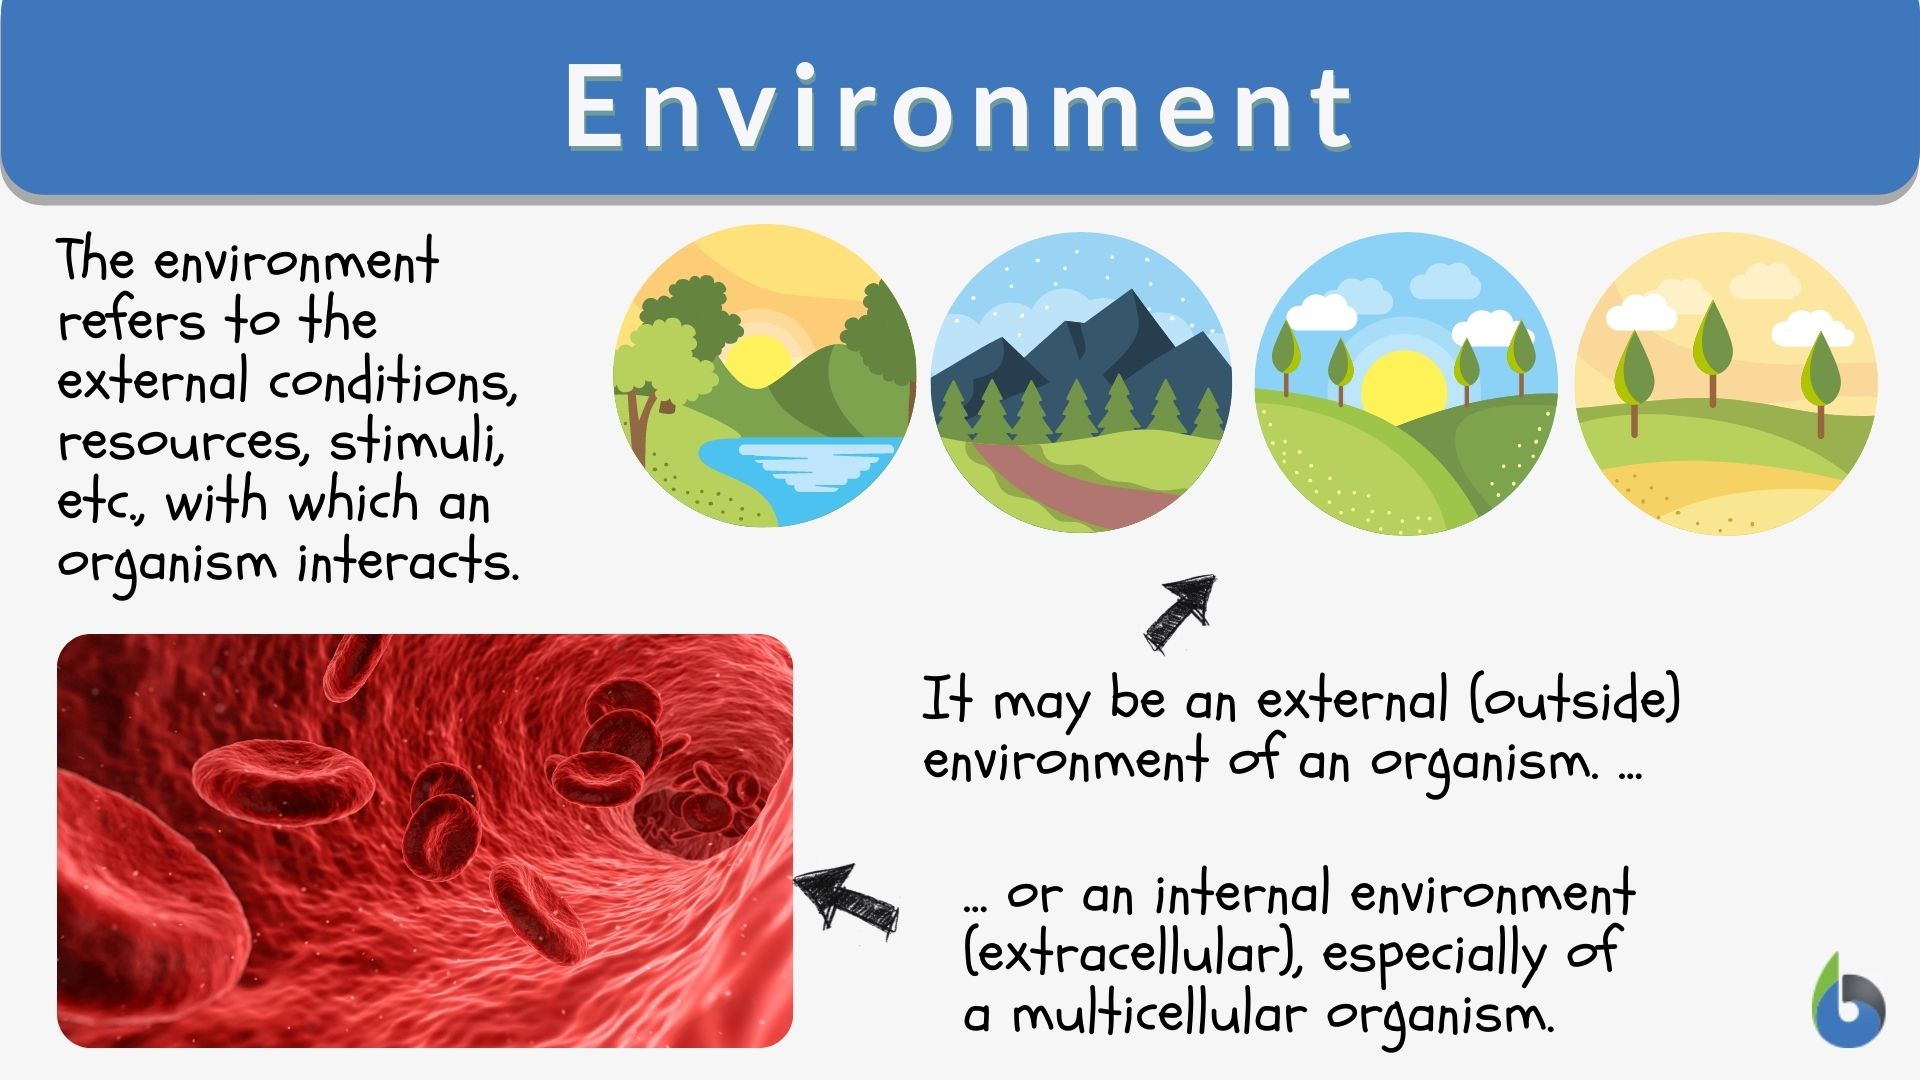 How many kinds of environment are there?